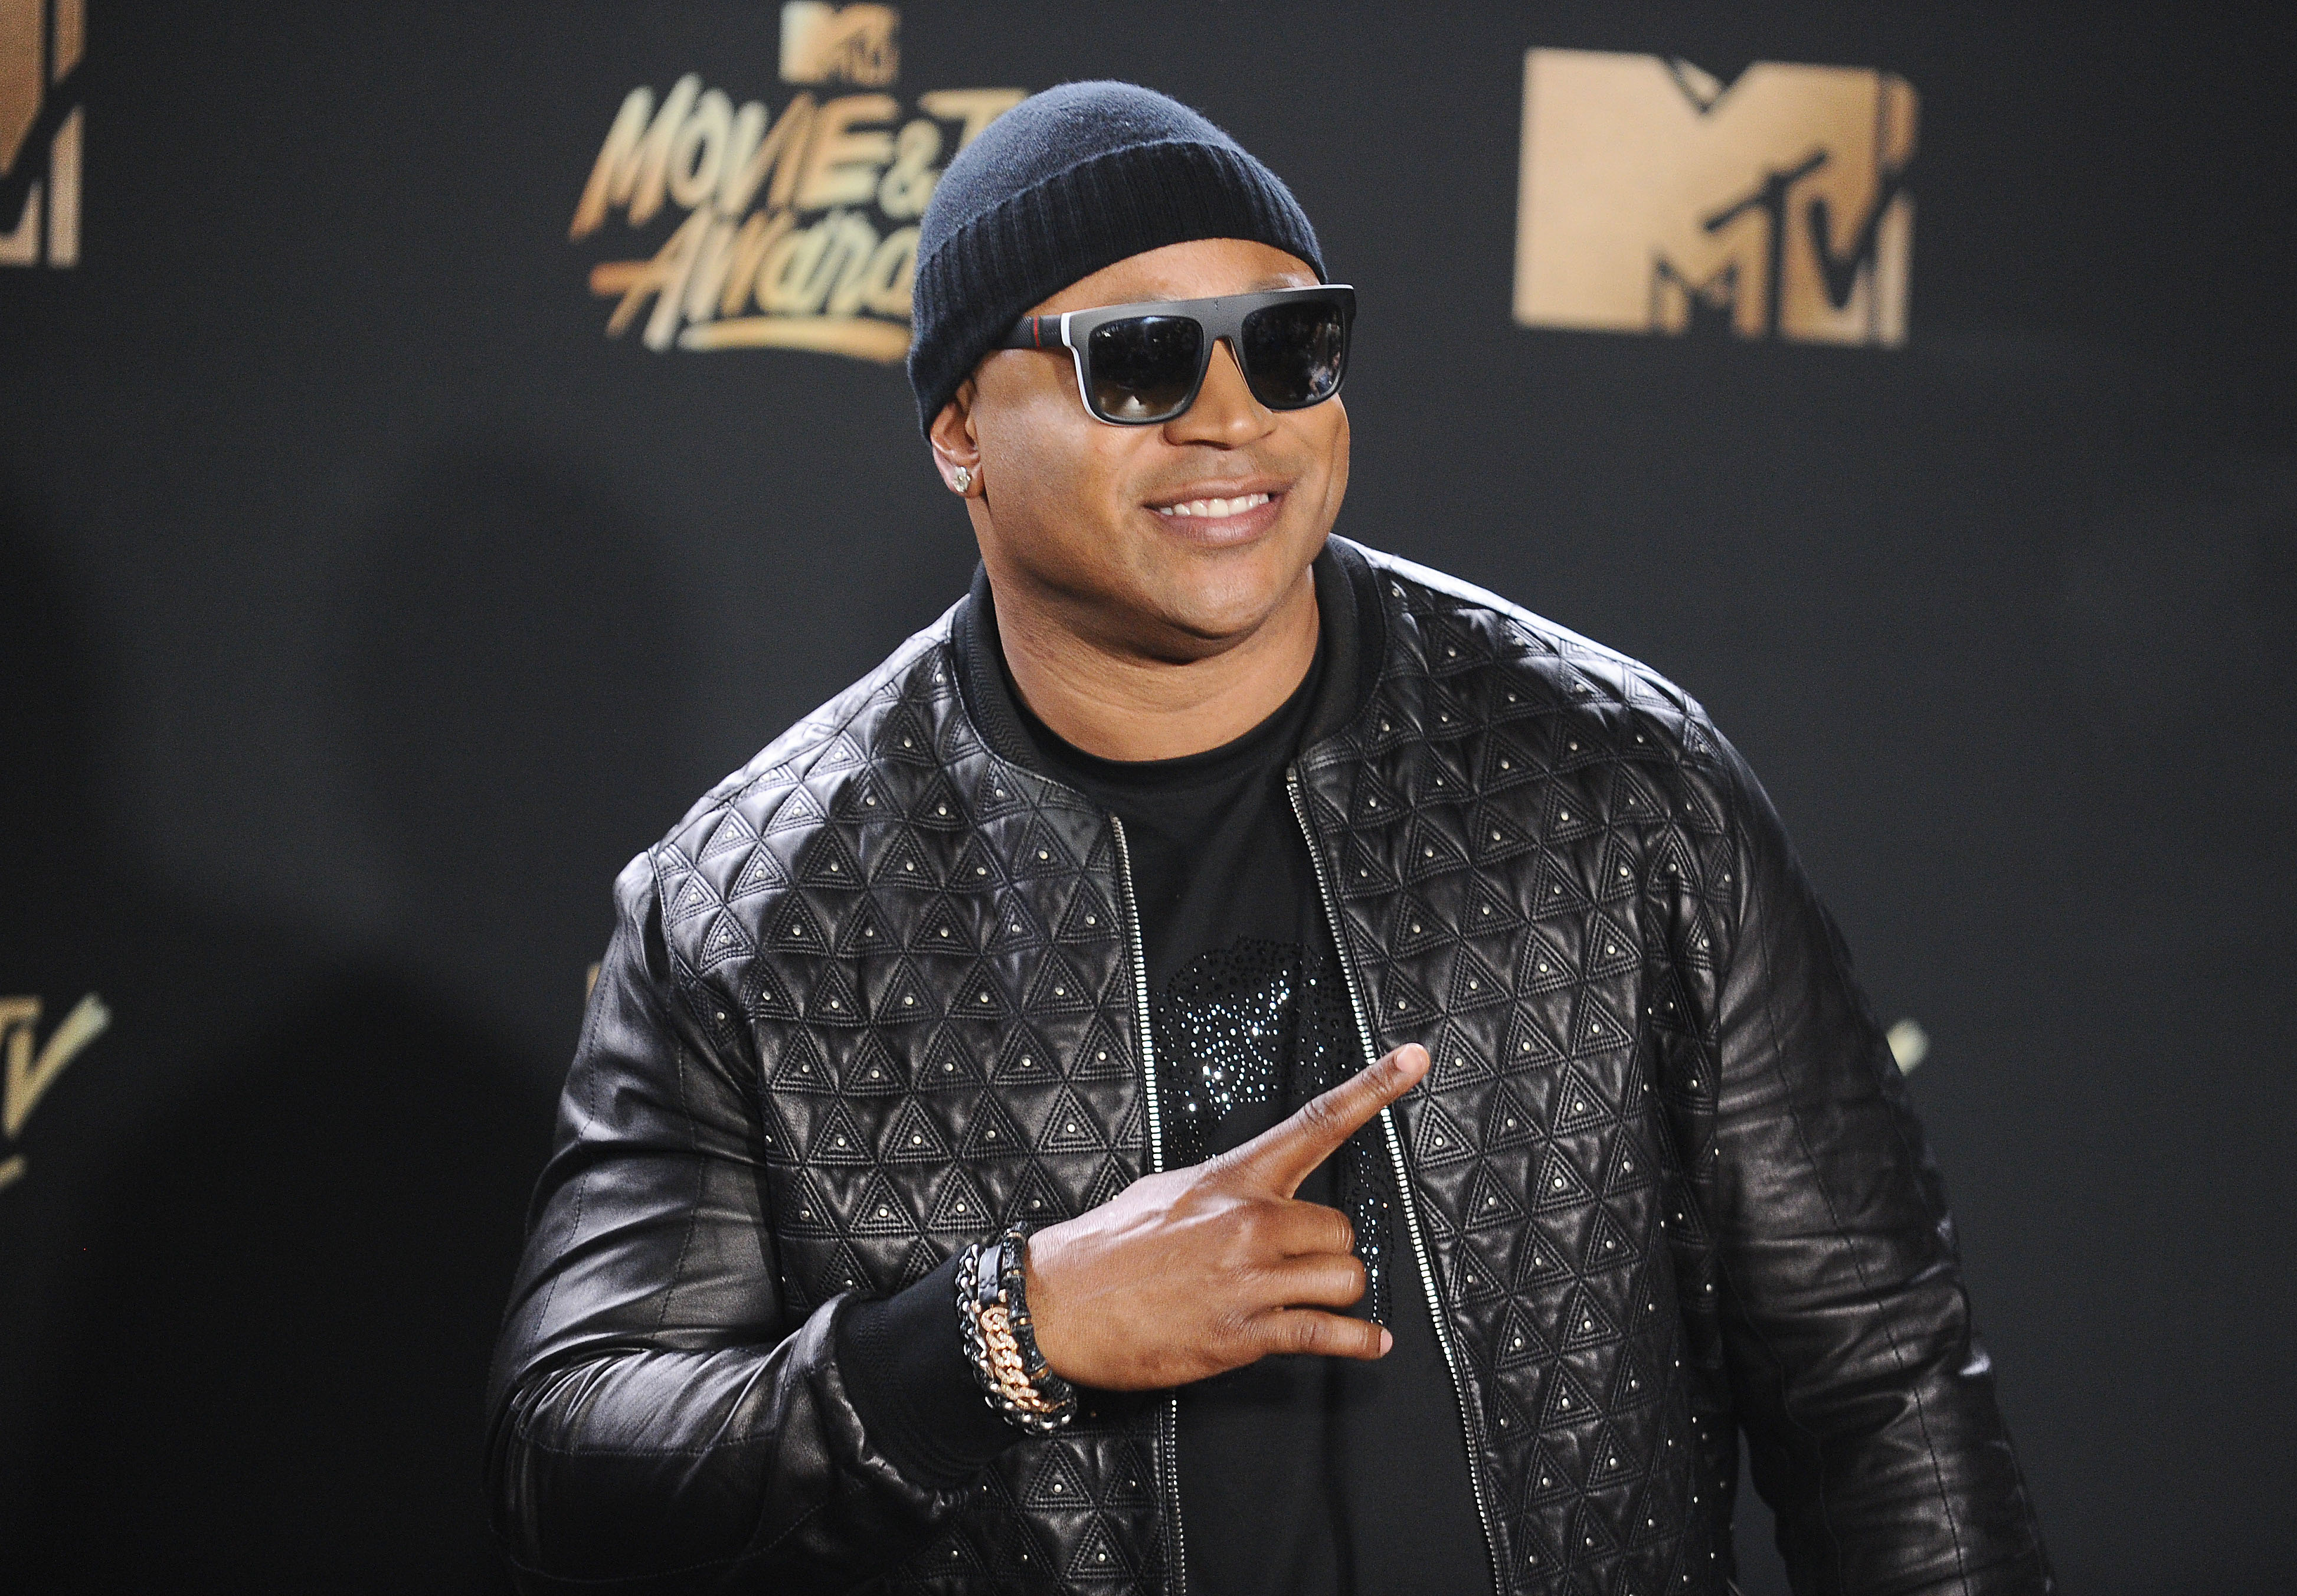  LL Cool J at the 2017 MTV Movie and TV Awards at The Shrine Auditorium on May 7, 2017. | Photo: Getty Images